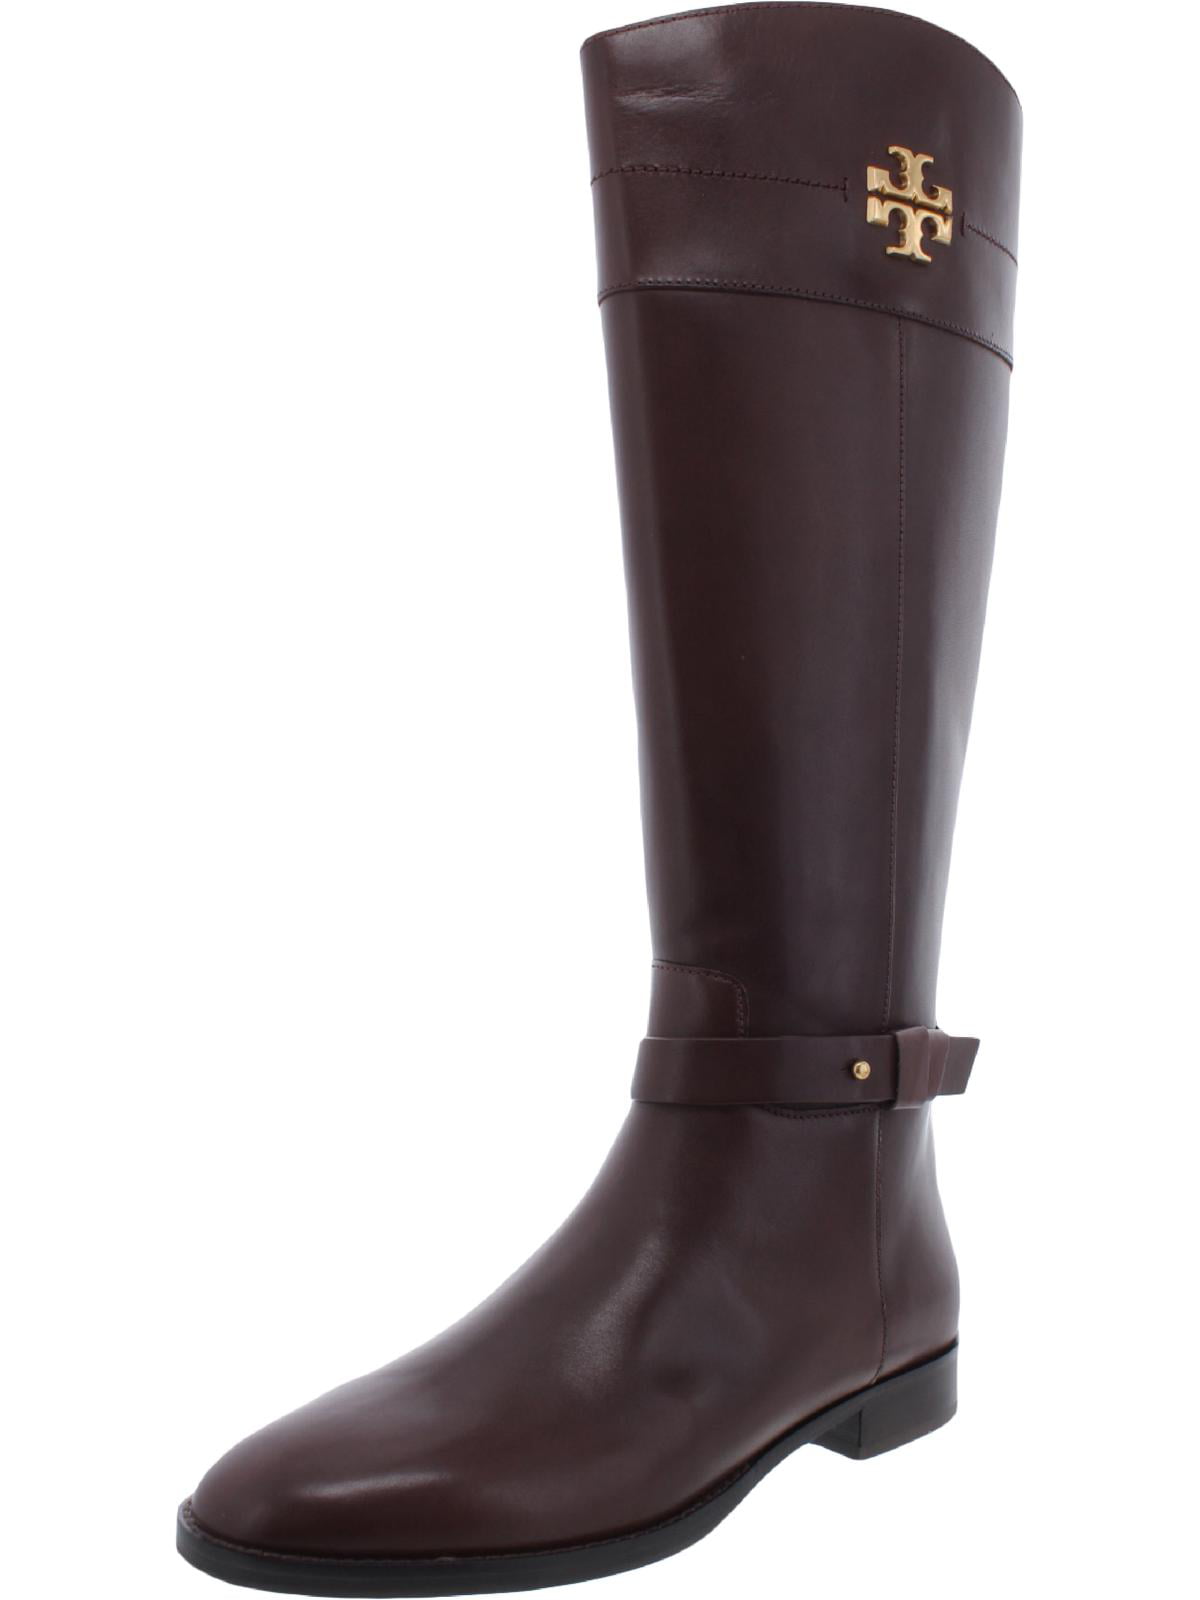 Tory Burch Womens Everly Leather Riding Knee-High Boots Brown  Medium  (B,M) 